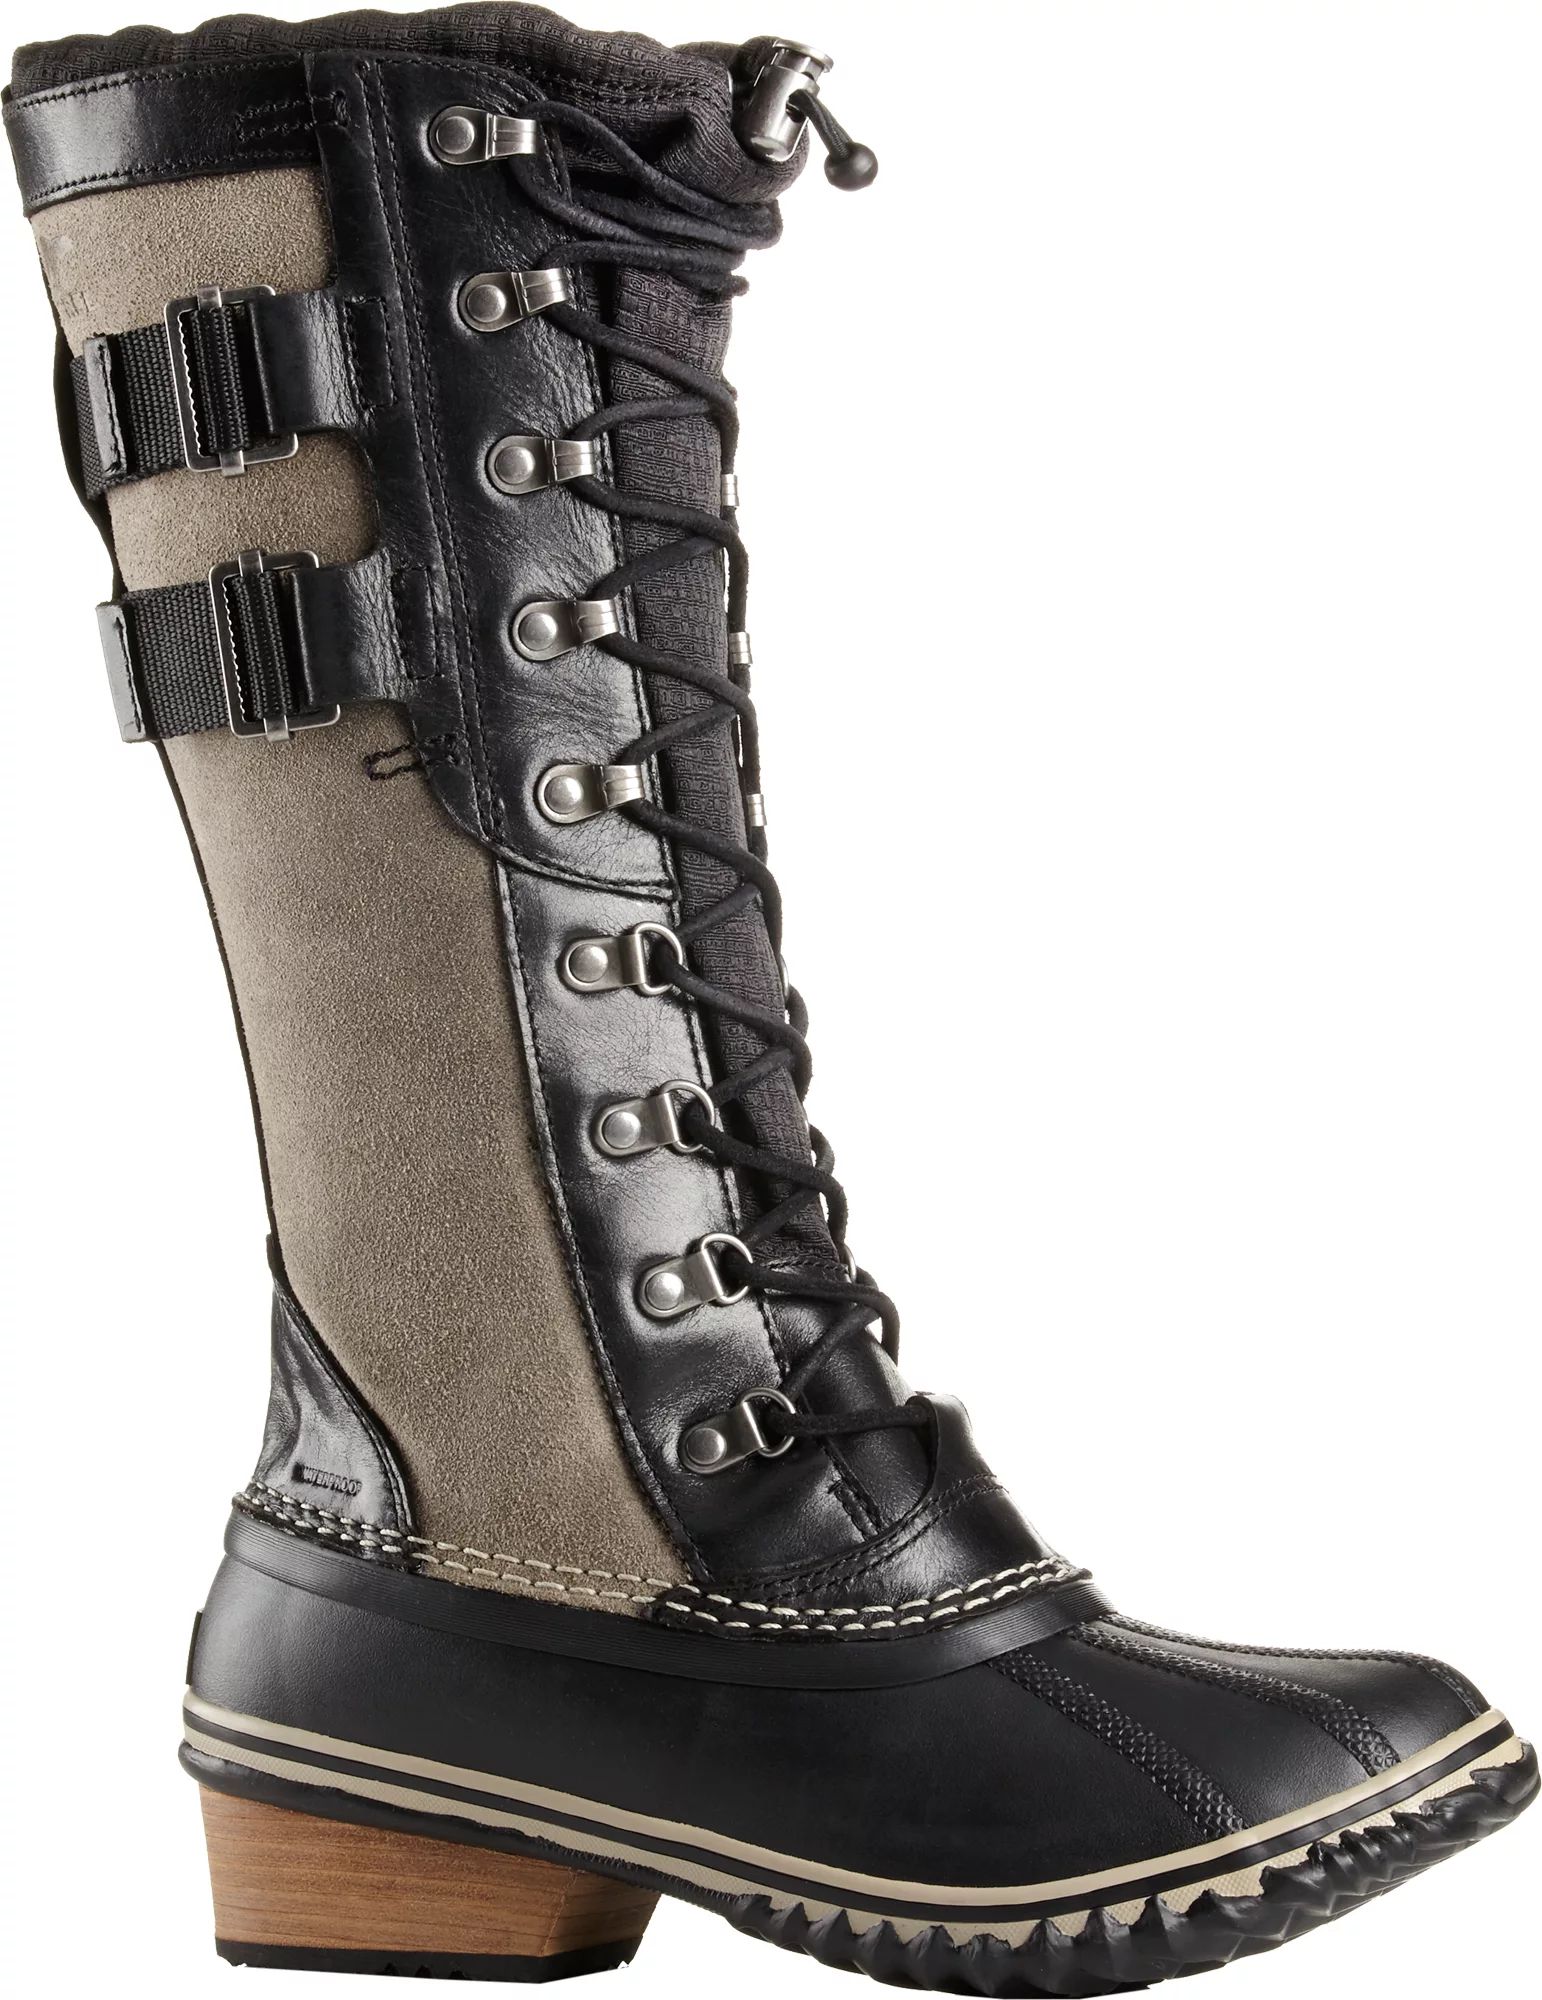 Sorel Women's Conquest Carly II 100g Winter Boots, Size: 6.5, Black | Dick's Sporting Goods